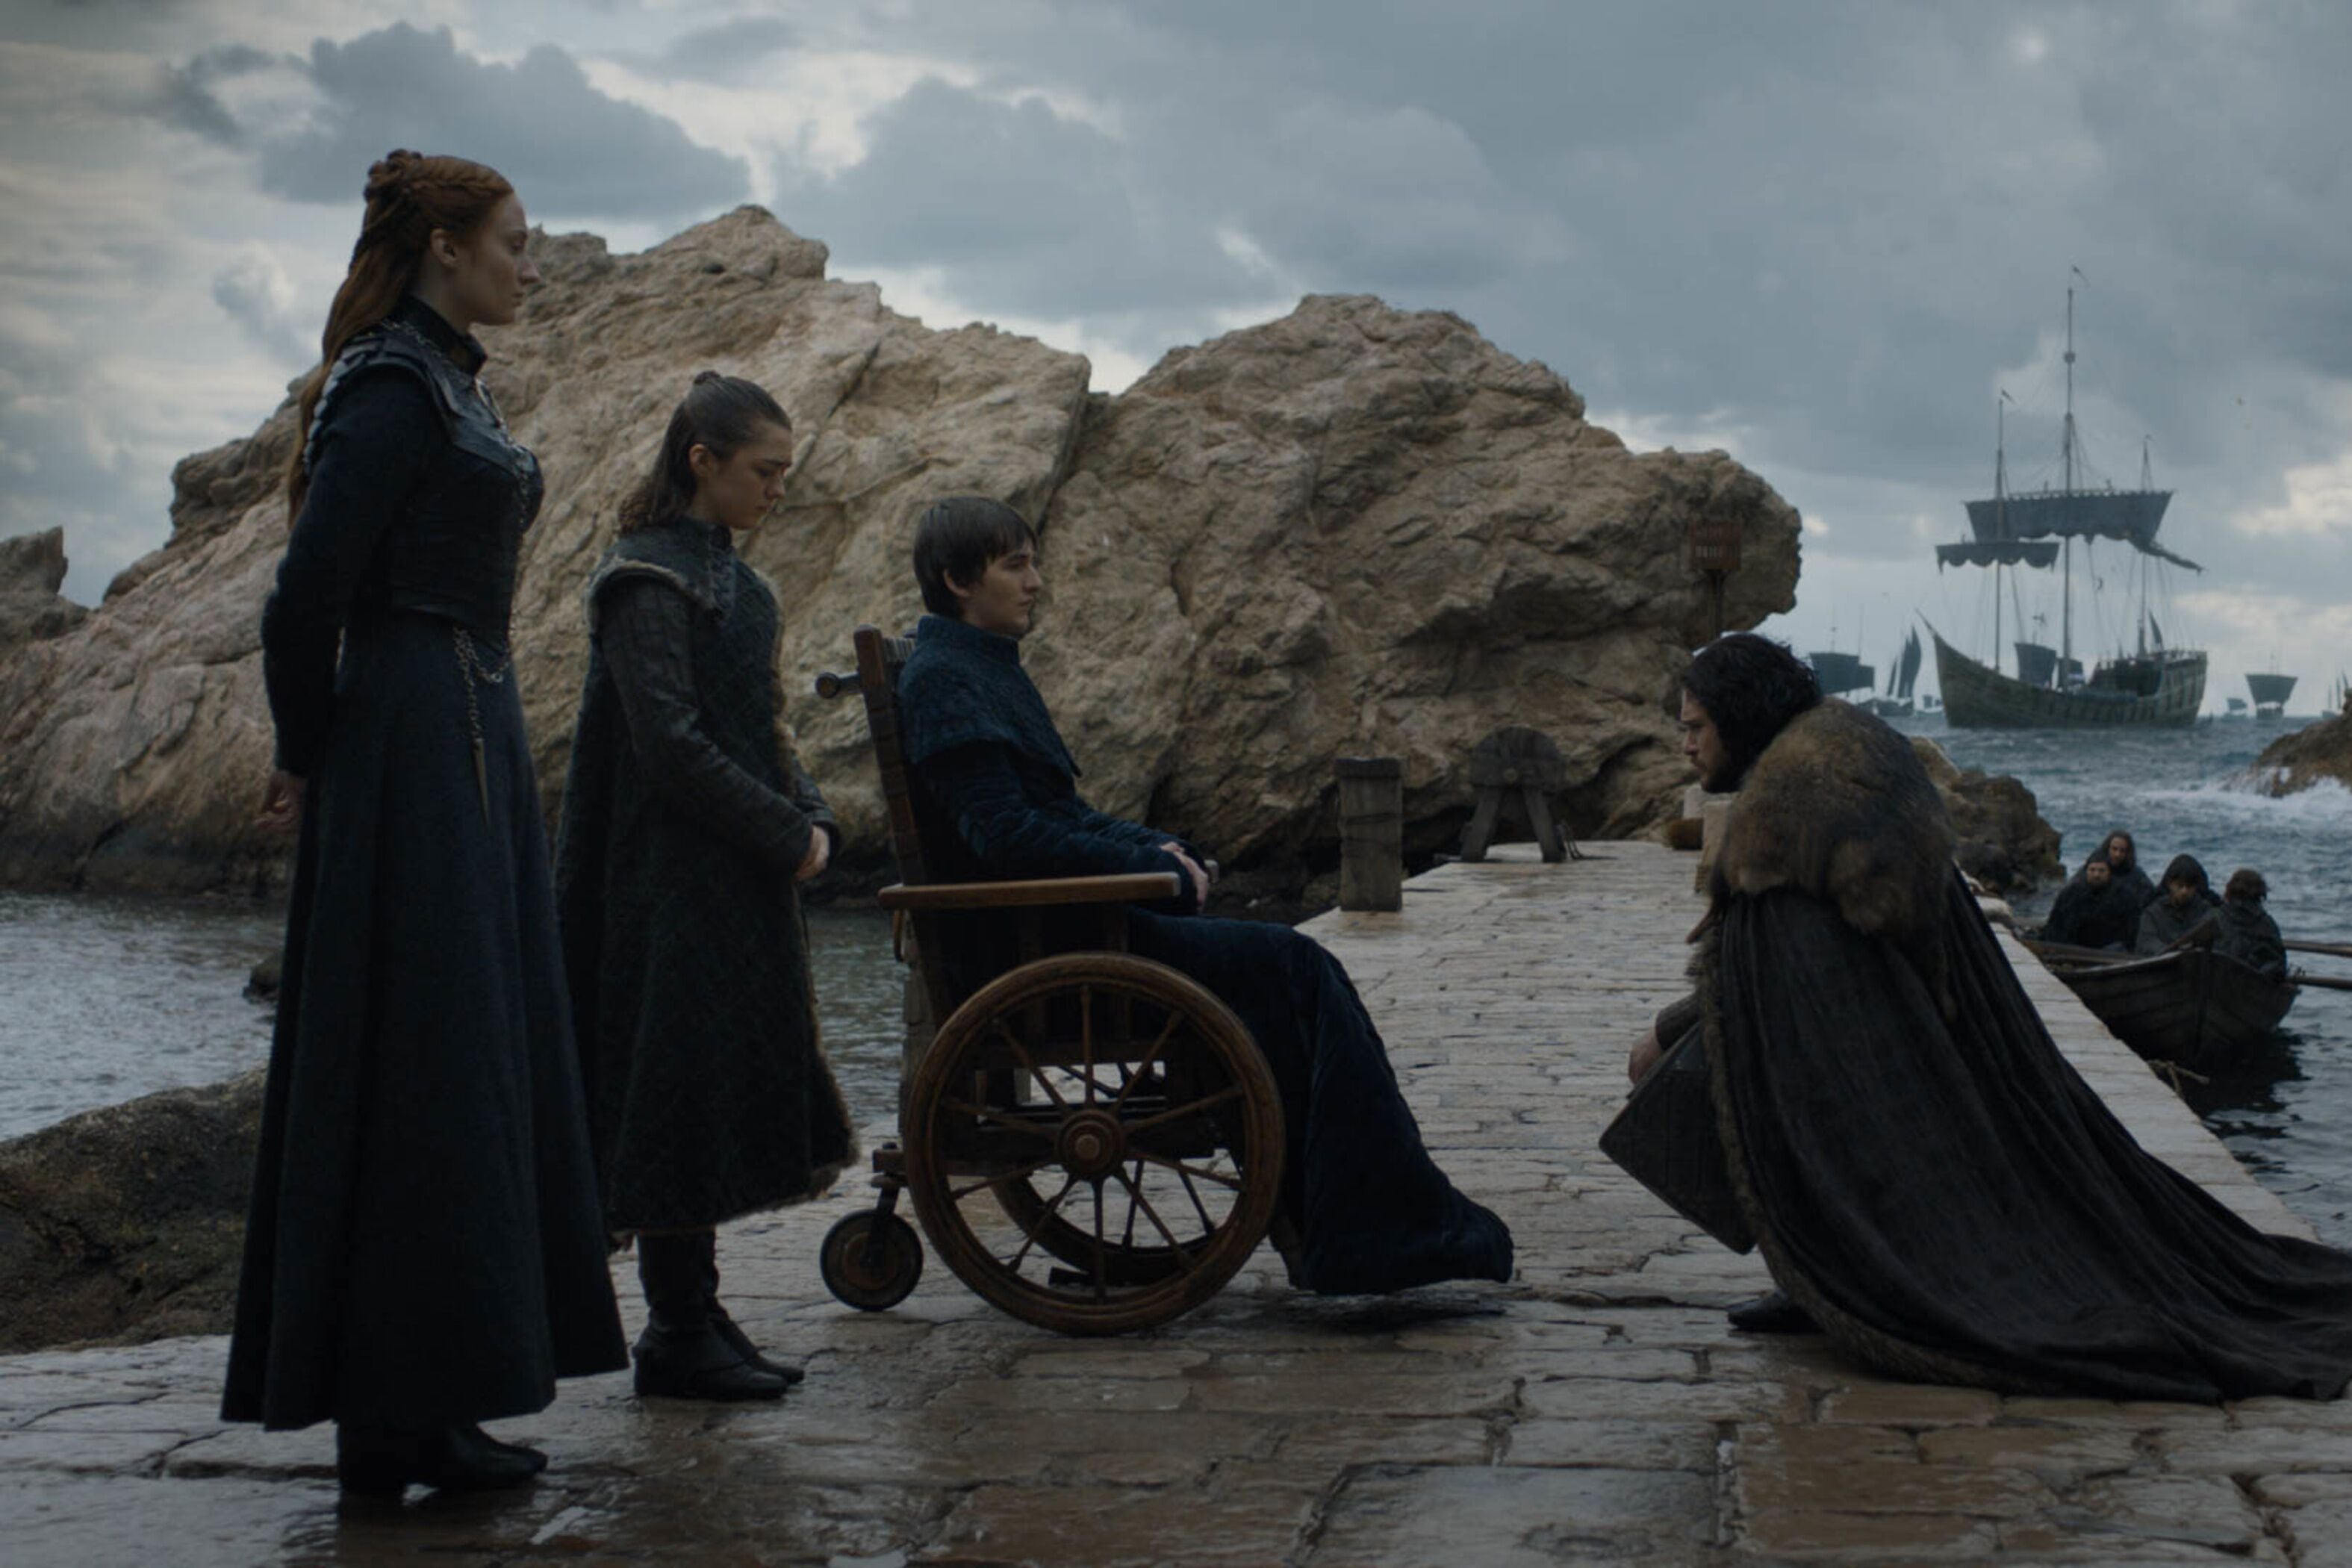 Sansa, Arya, and Bran Stark stand on a jetty with a ship in the background. Jon Snow kneels before them.